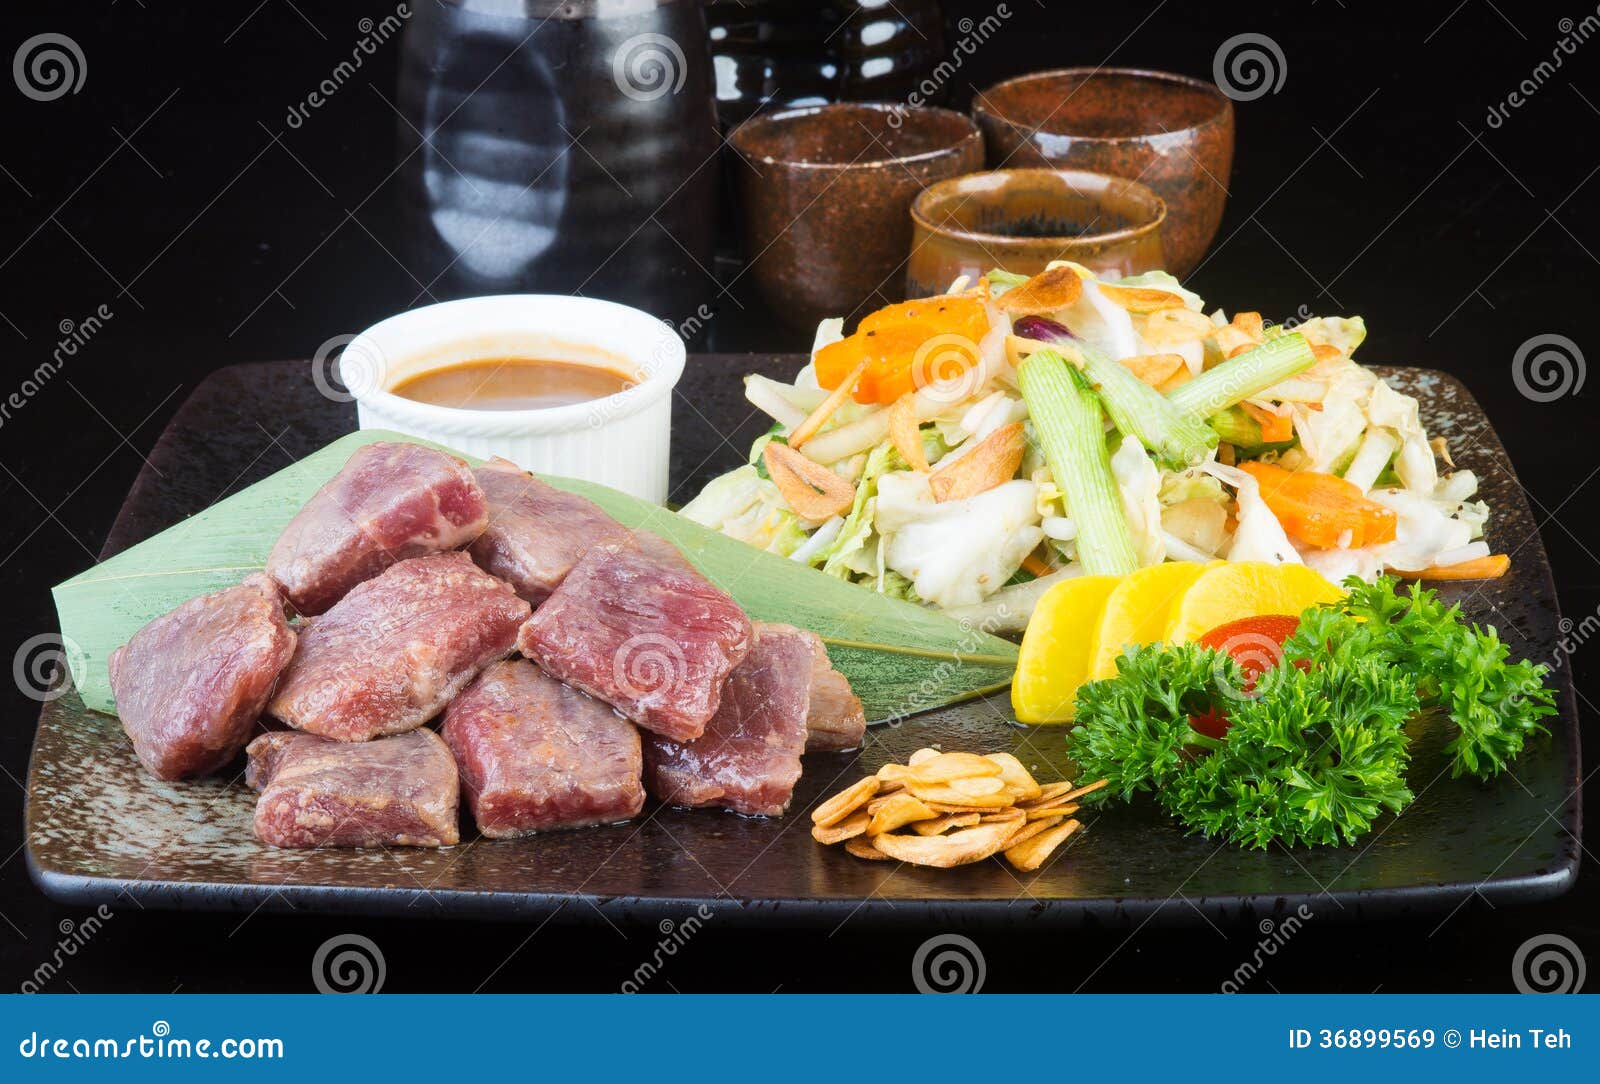 Japanese Cuisine. Beef Cube On The Background Stock Image ...